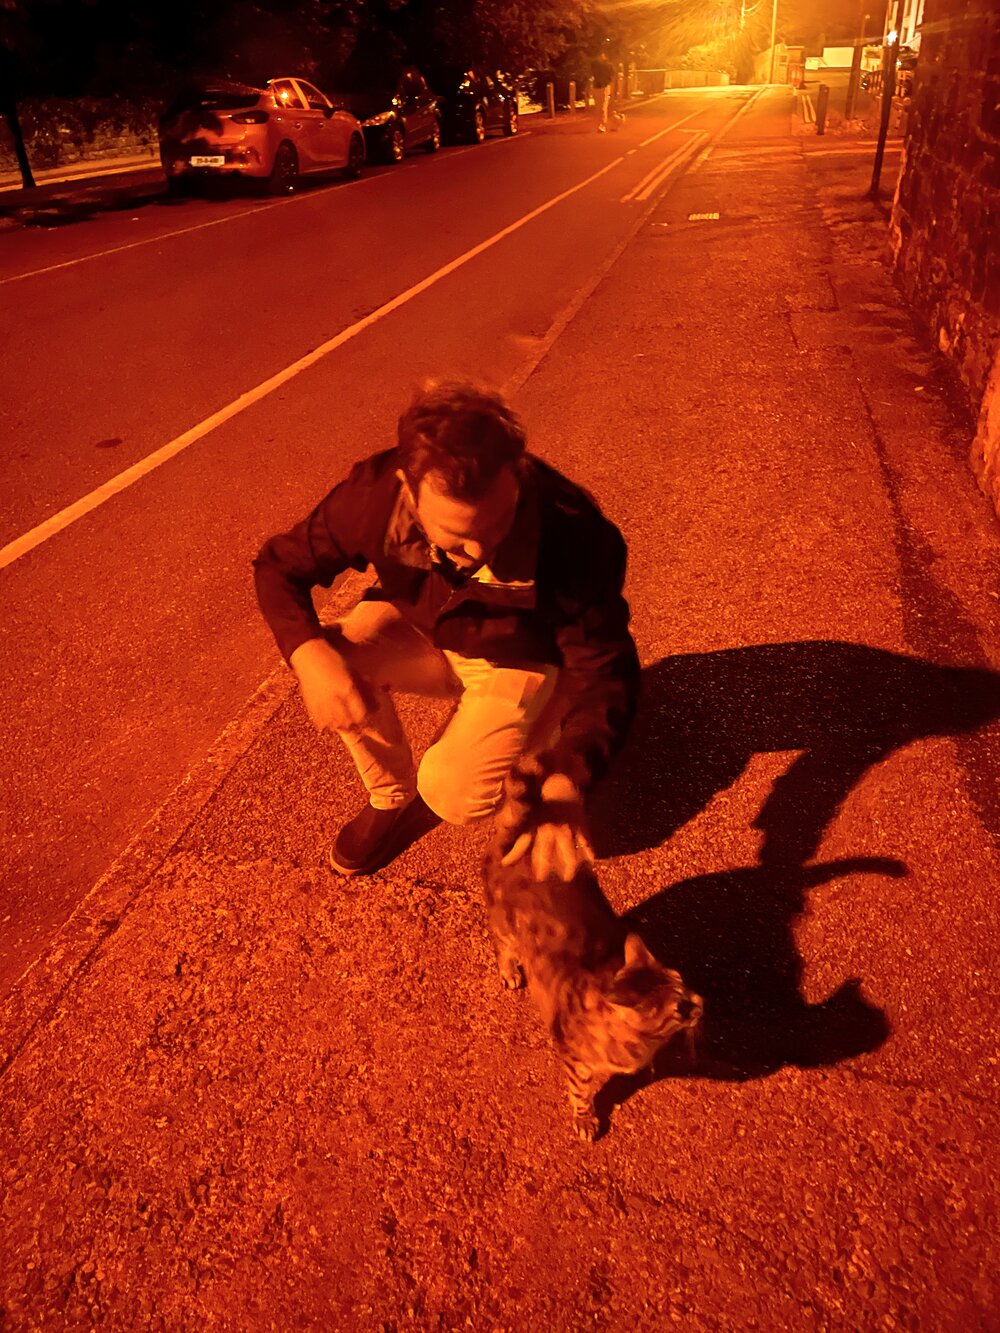 Brian the cat whisperer found a friend on the way home from the pub